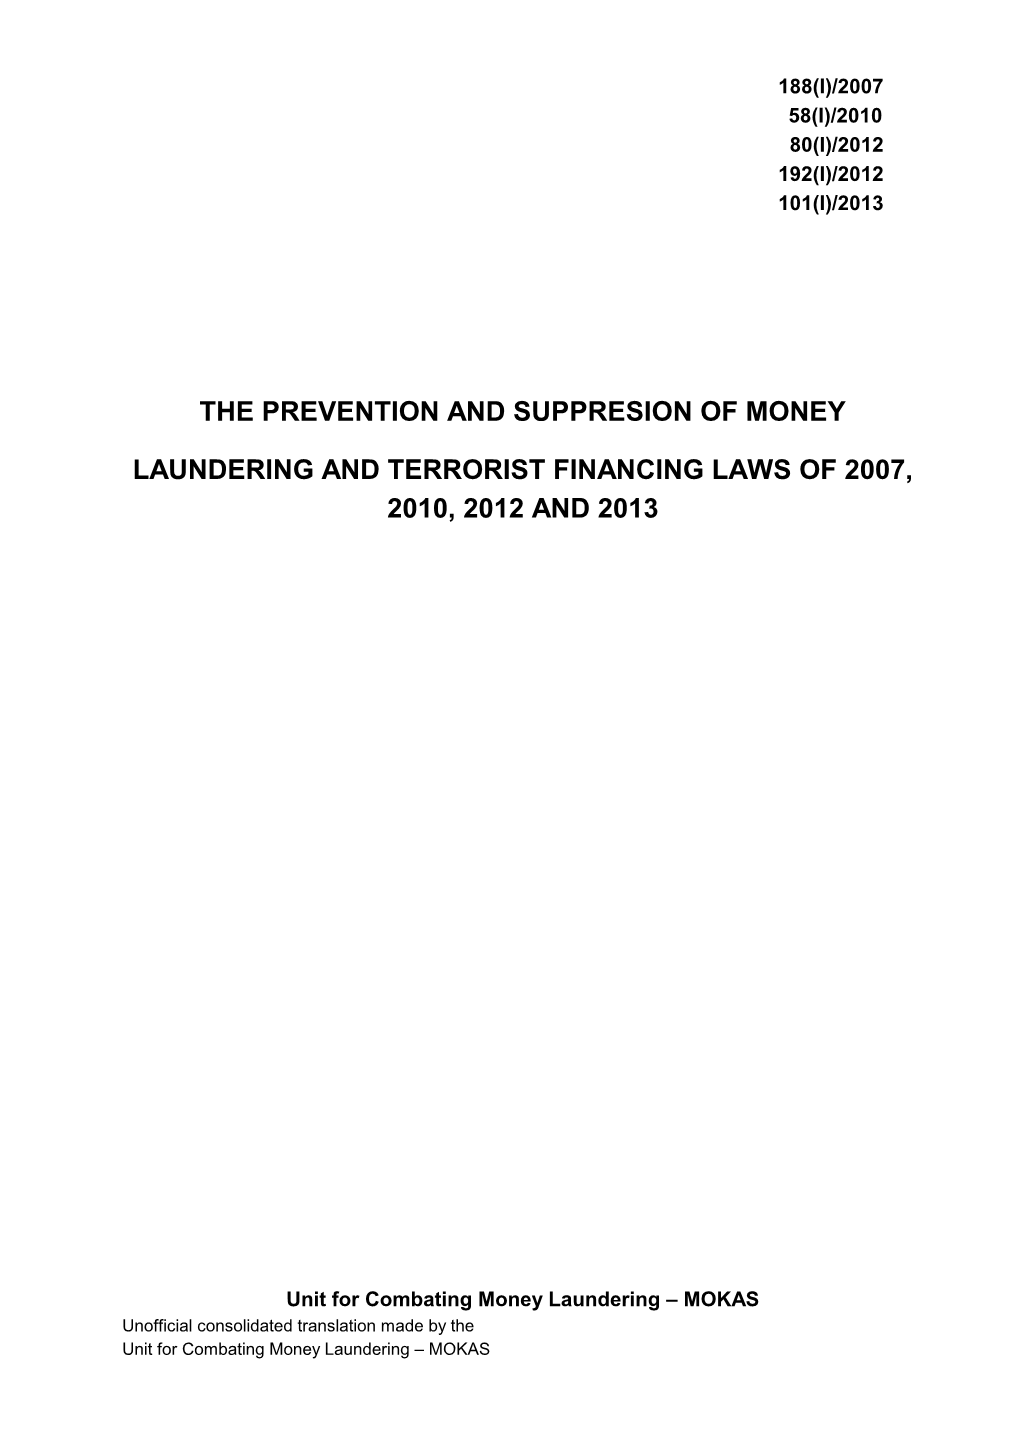 Prevention and Suppression of Money Laundering and Terrorist Financing Laws of 2007-2013